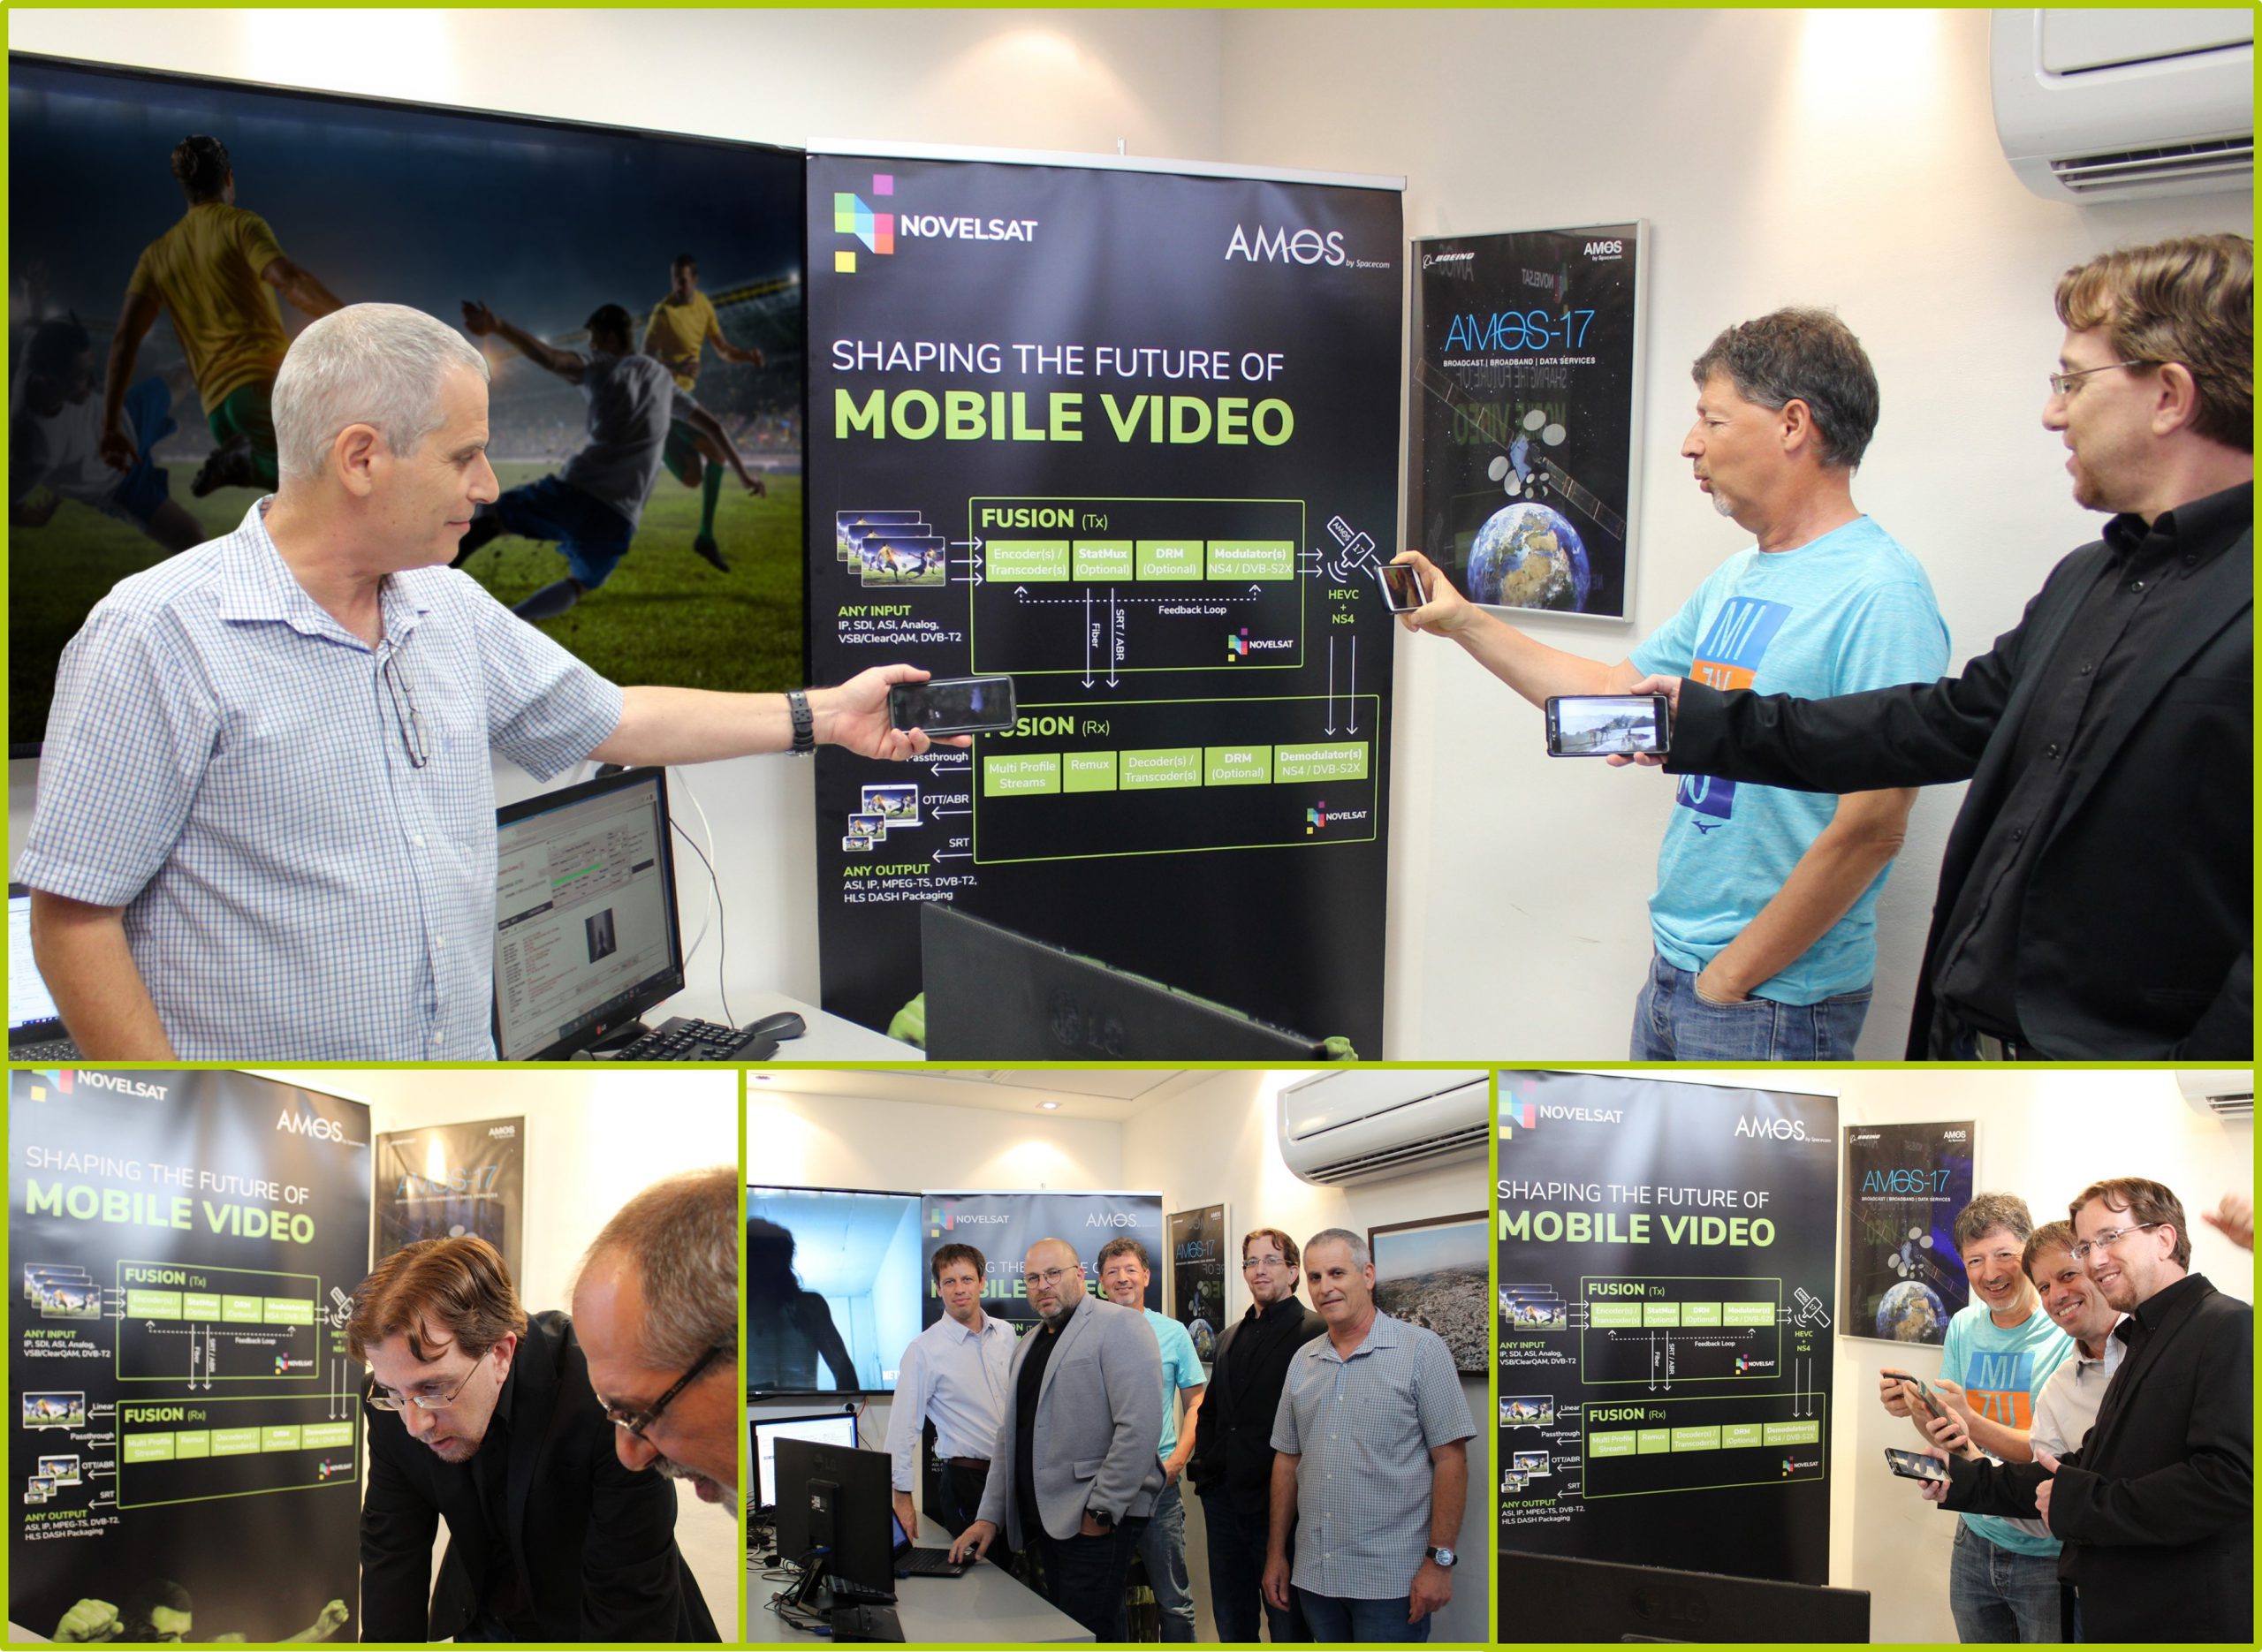 Spacecom and NOVELSAT Demonstrate High-Volume Video Delivery over AMOS-17 Satellite for 5G Networks and Wi-Fi Hotspots